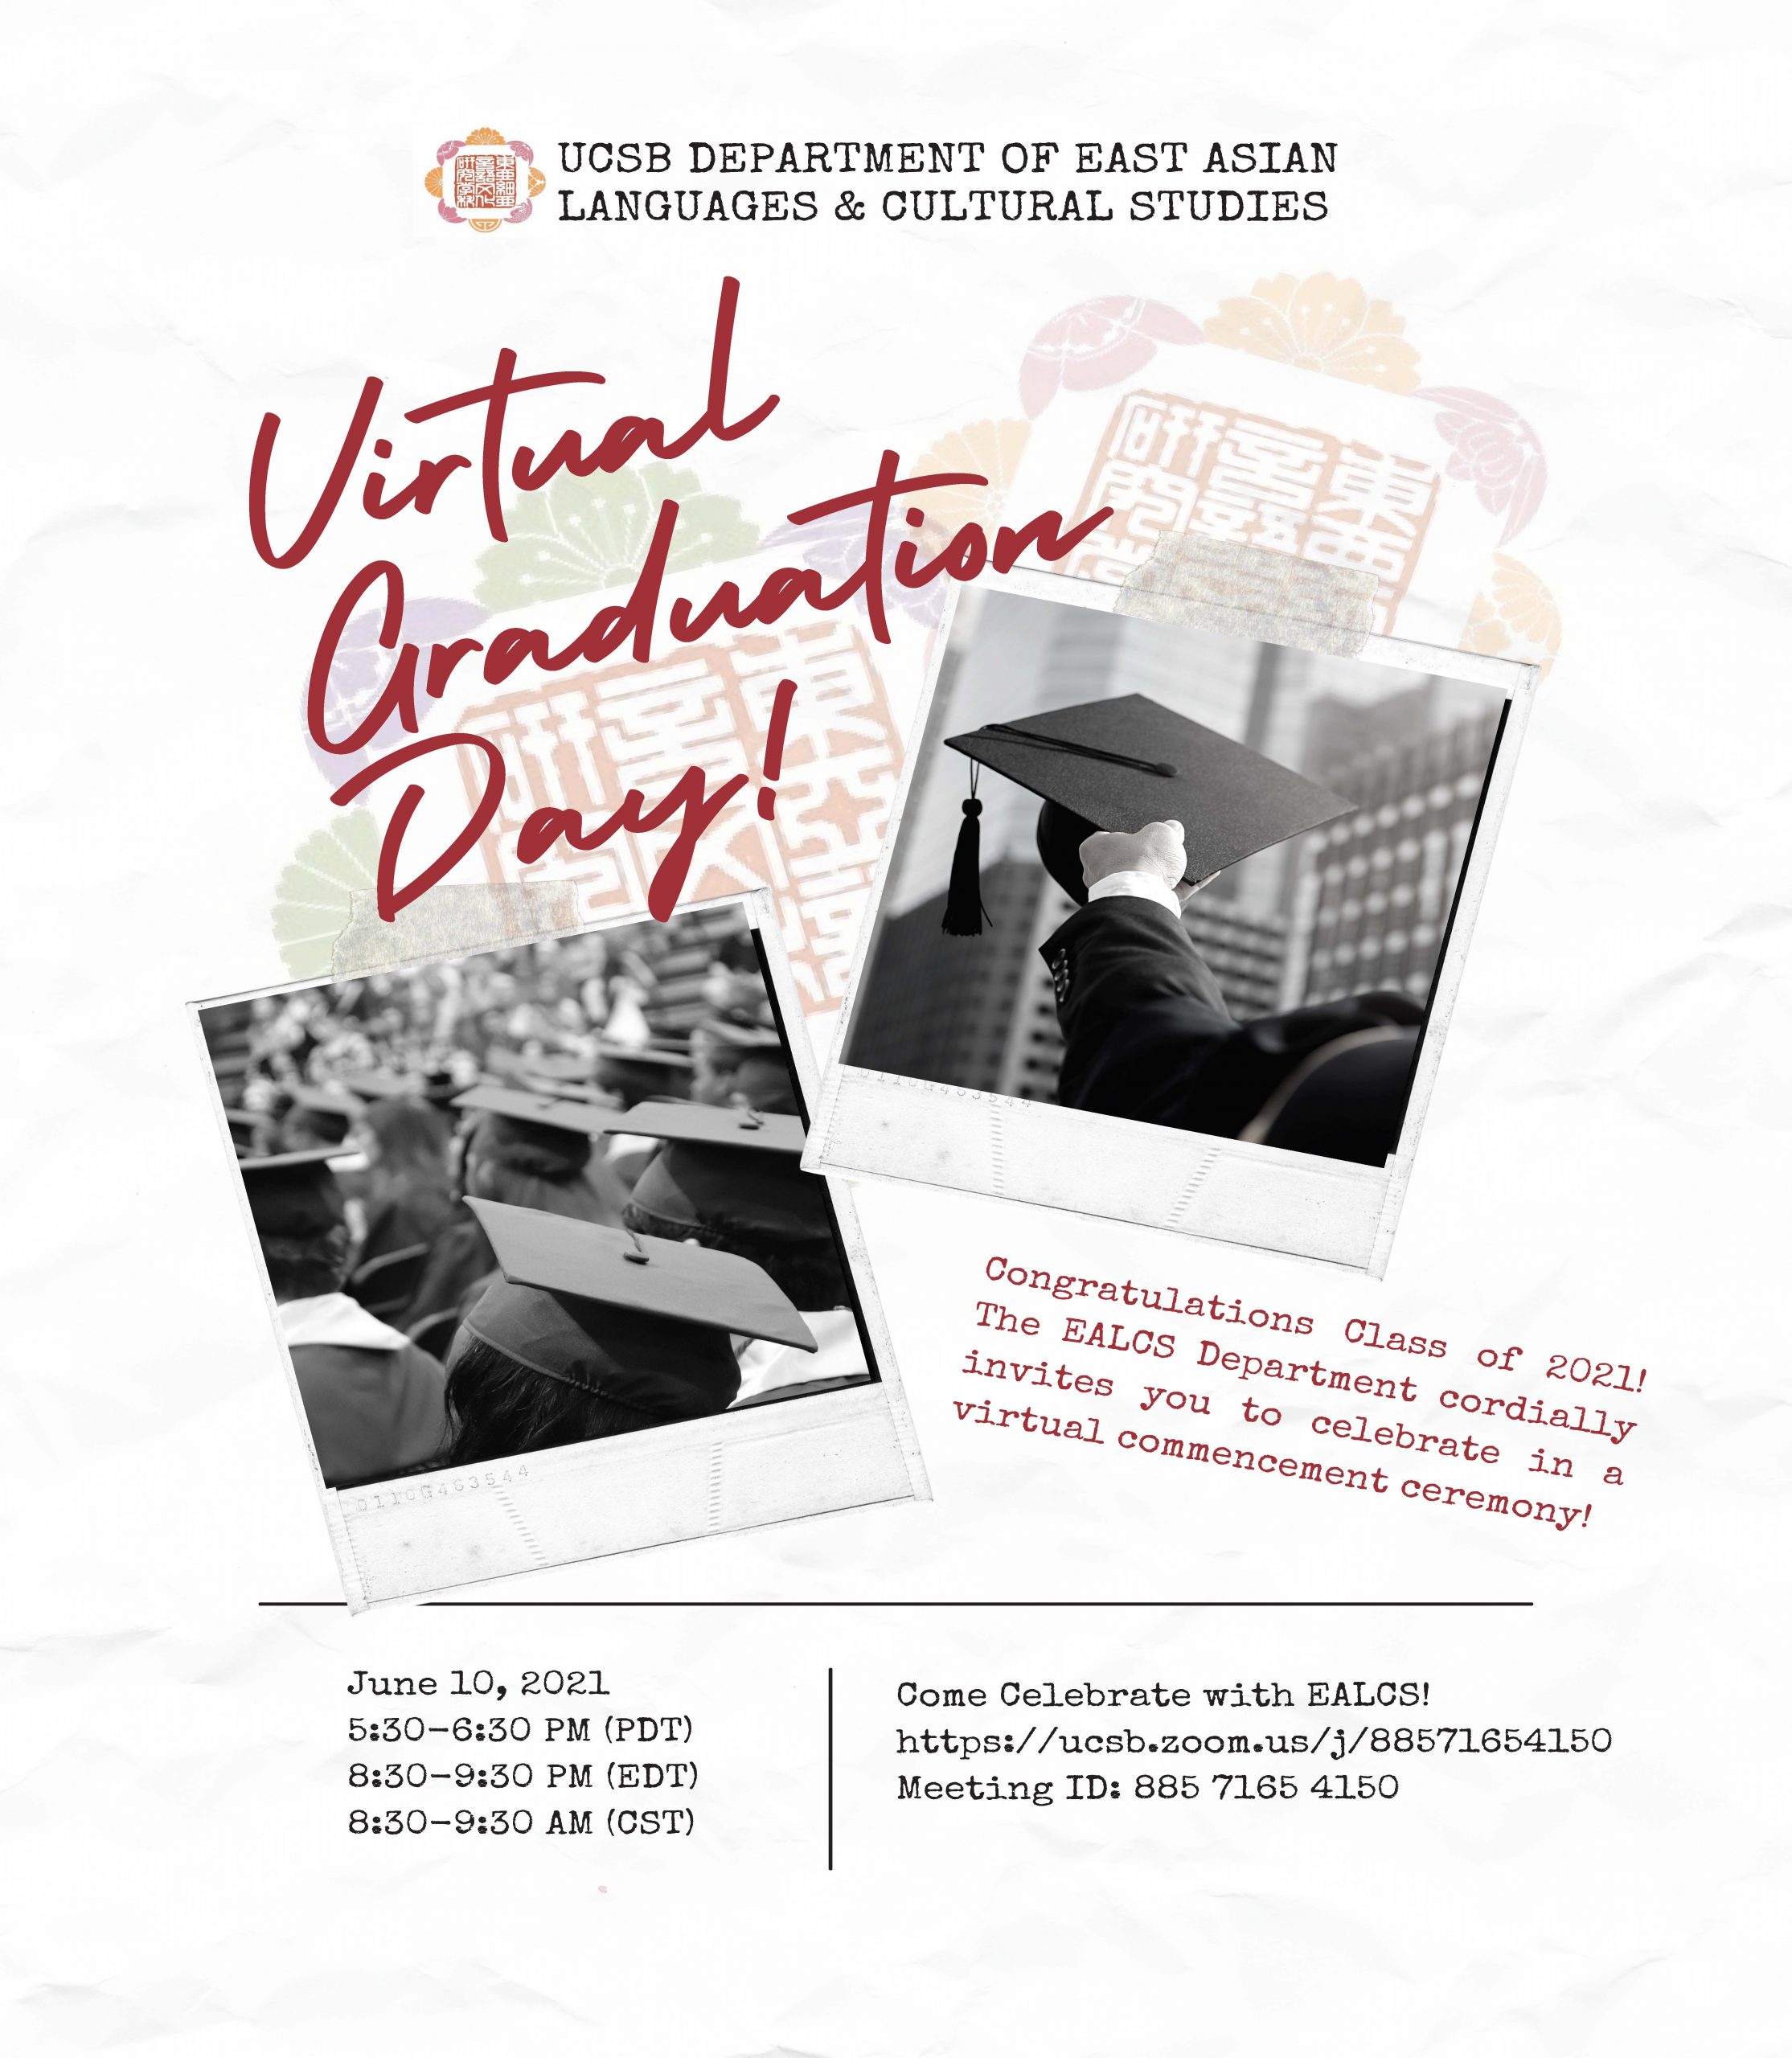 Virtual Graduation Schedule for UCSB EACS Department